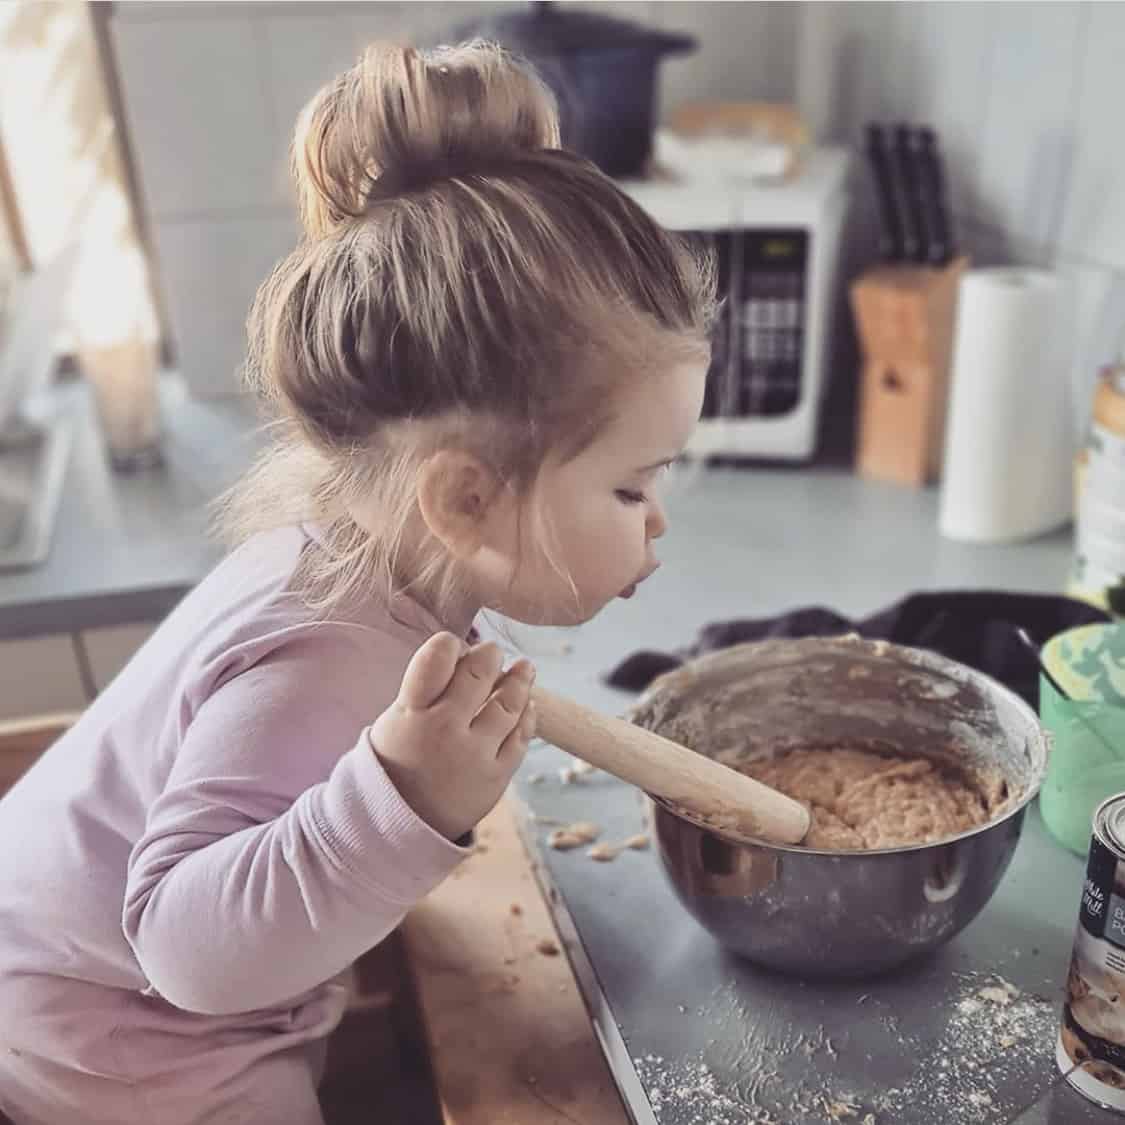 A toddler girl mixing a bowl of cake batter with a wooden spoon.